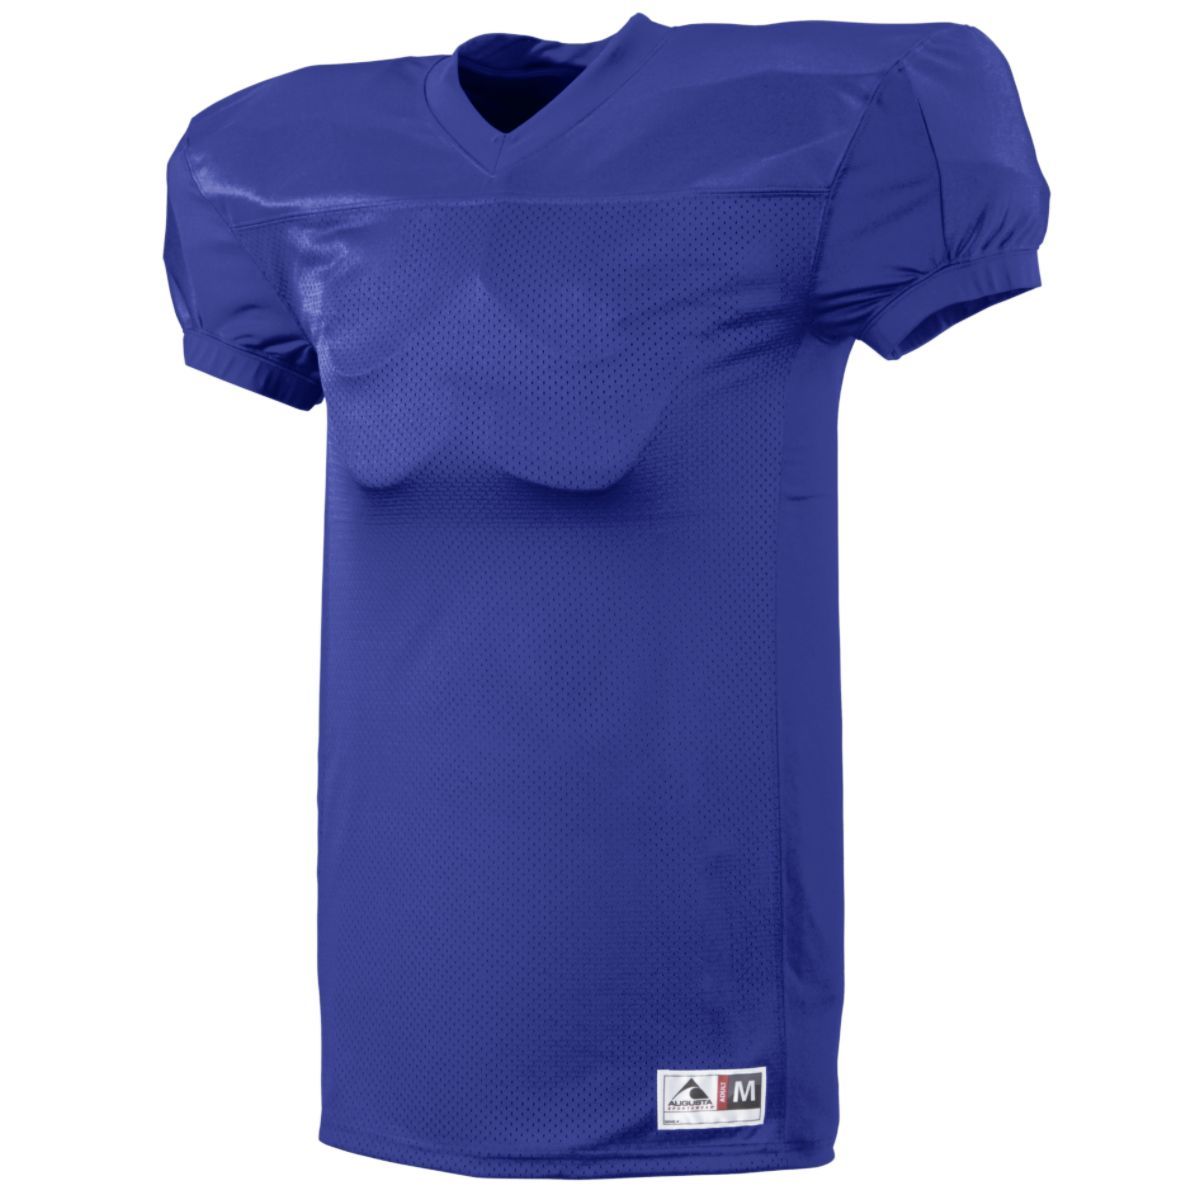 Augusta Sportswear Scrambler Jersey in Purple  -Part of the Adult, Adult-Jersey, Augusta-Products, Football, Shirts, All-Sports, All-Sports-1 product lines at KanaleyCreations.com